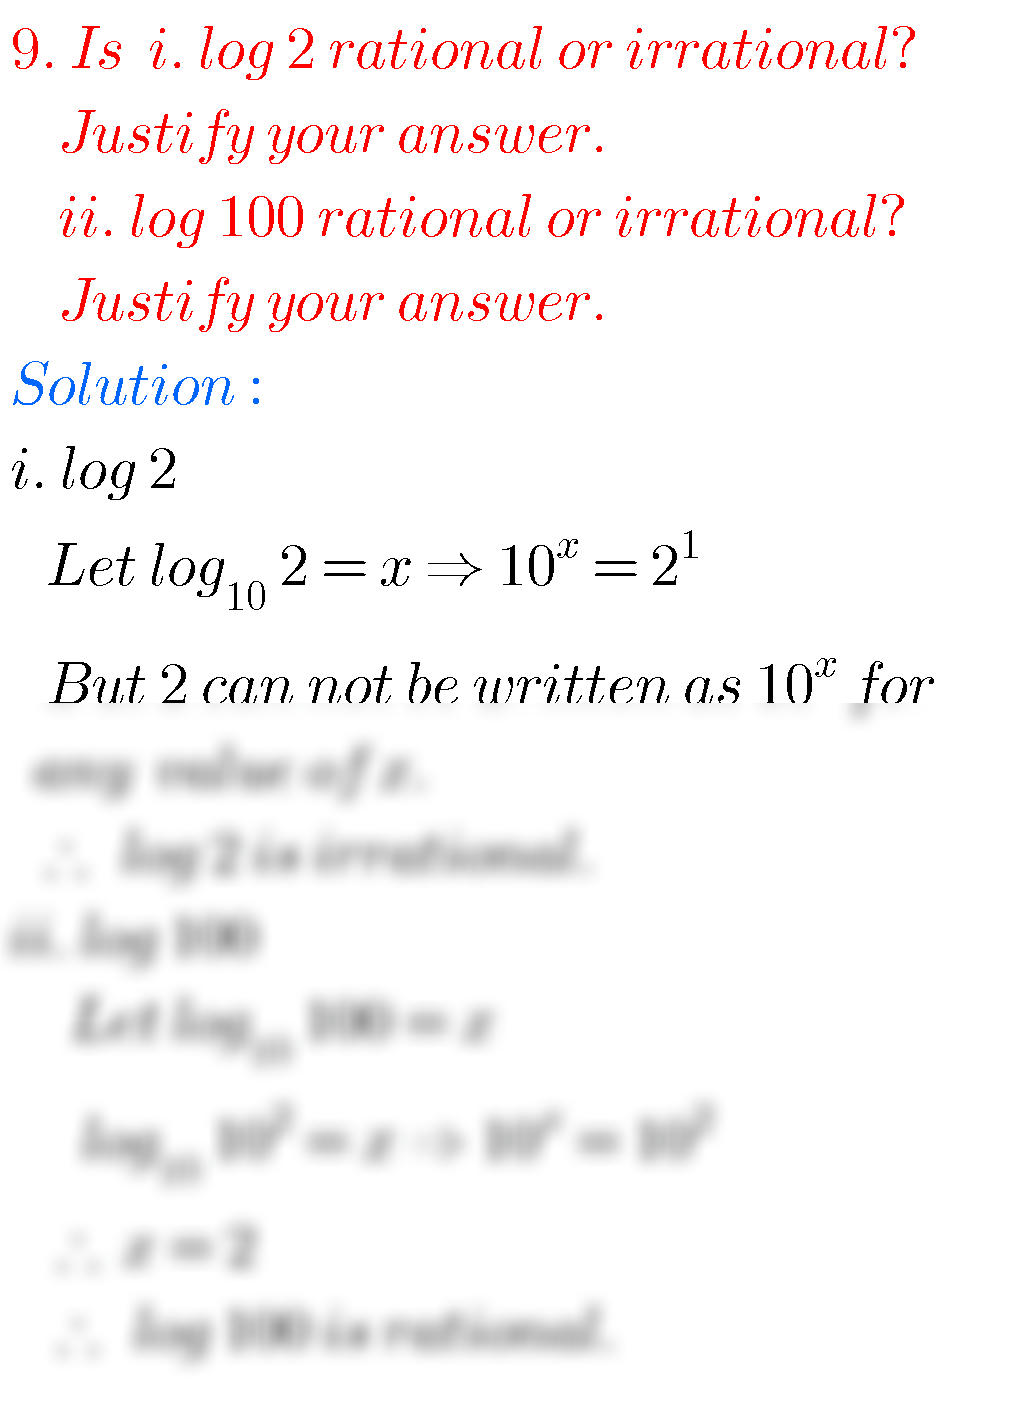 log2 is rational or irrational